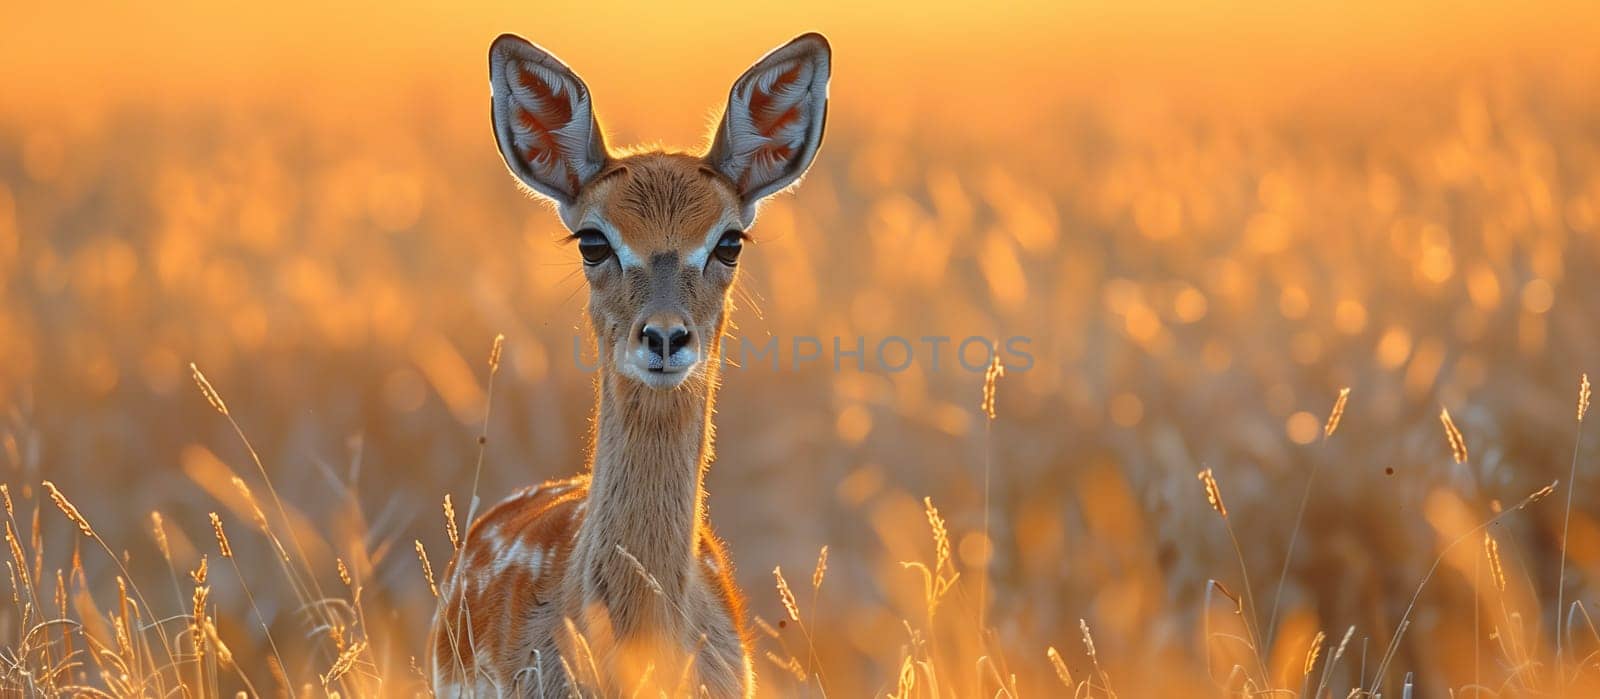 A deer in tall grass, staring at the camera in a natural landscape by richwolf